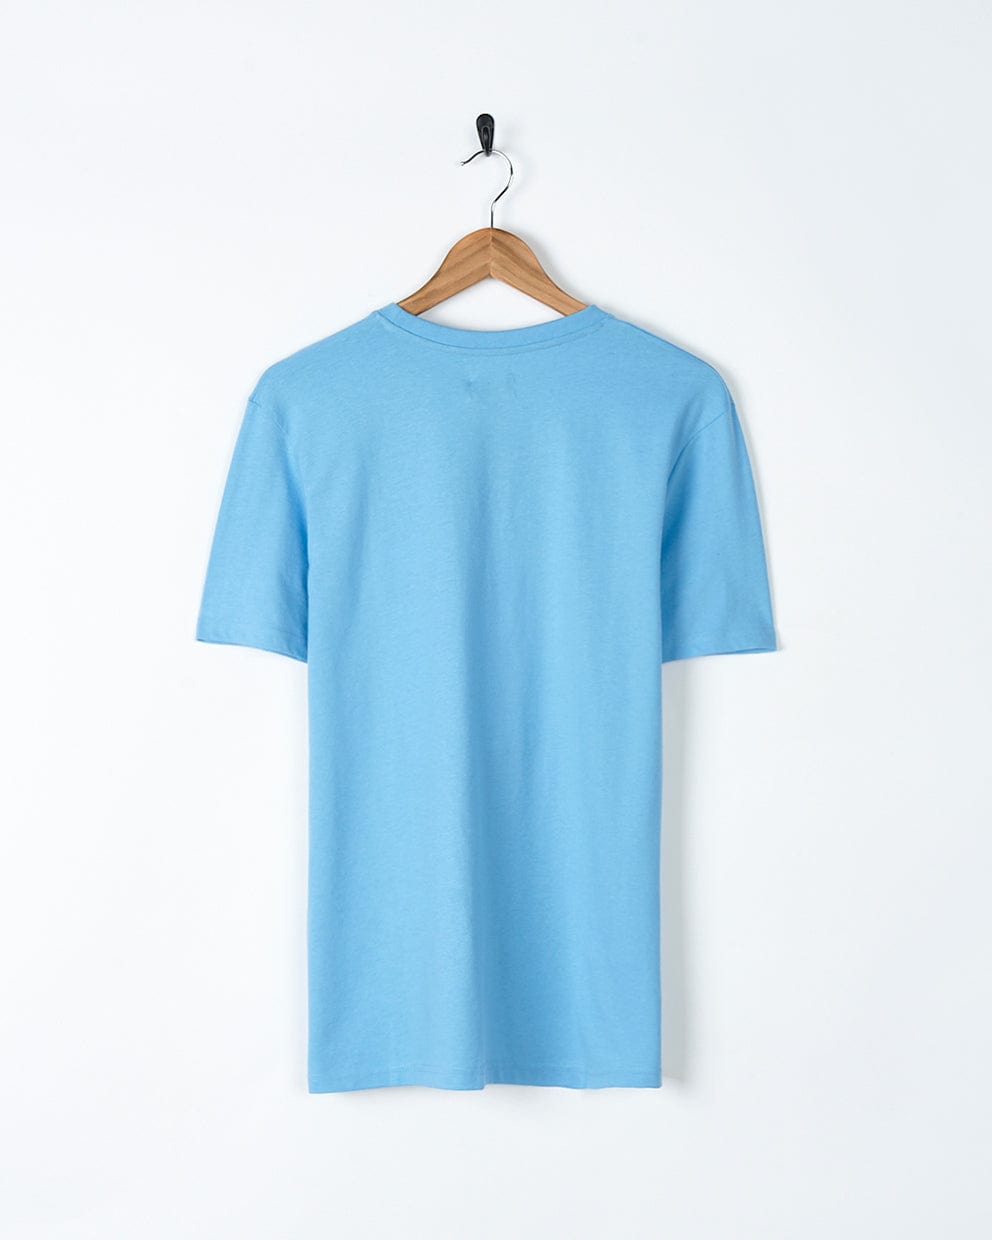 A Reflect - Mens T-Shirt - Blue by Saltrock, with a crew neck, hanging on a hanger.